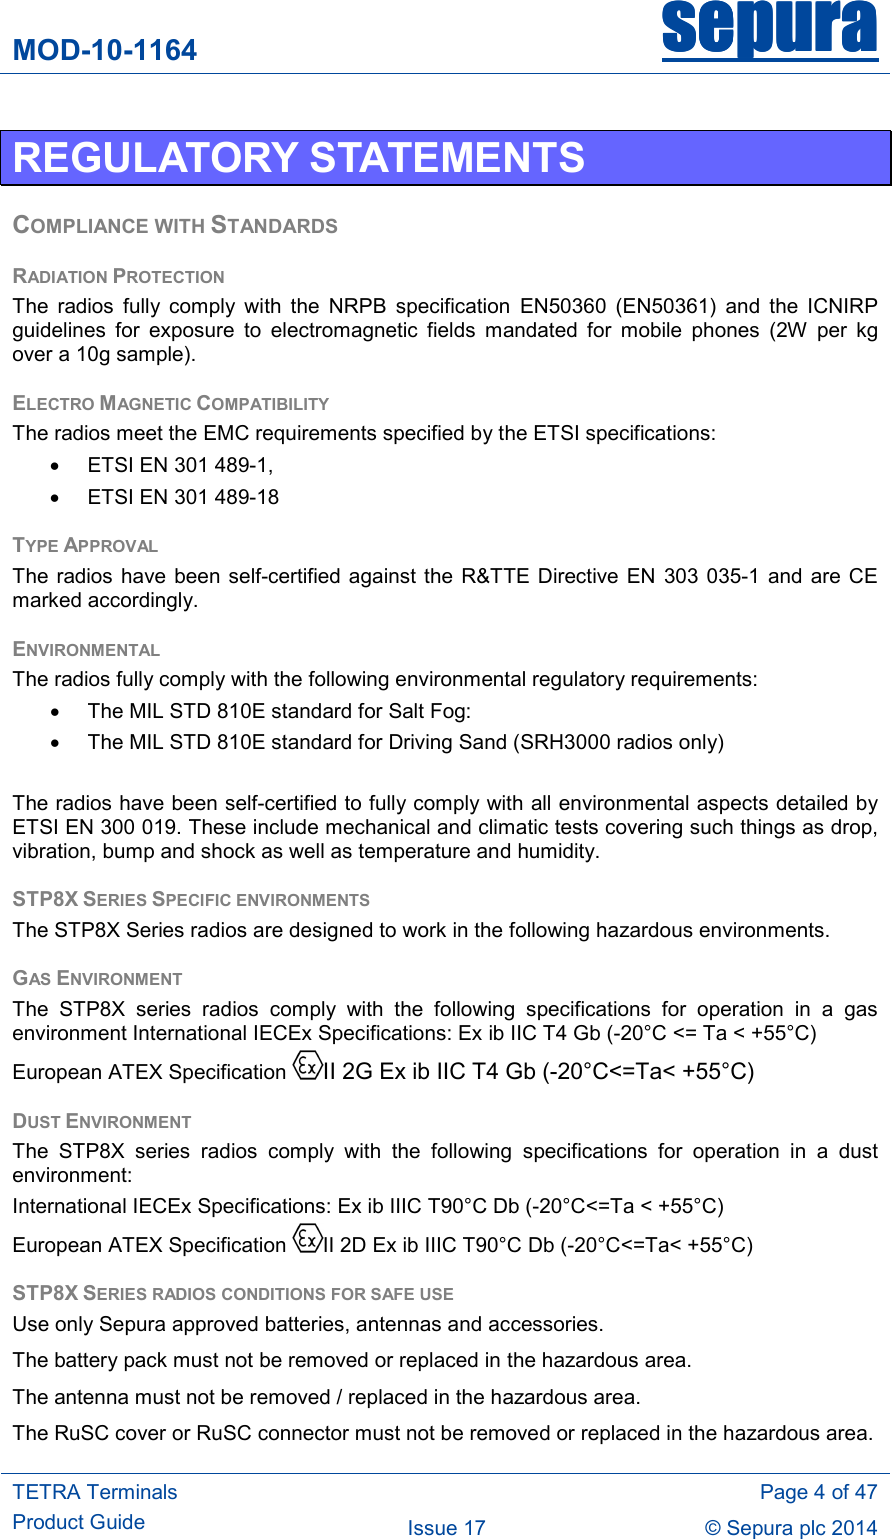 MOD-10-1164 sepurasepurasepurasepura     TETRA Terminals Product Guide   Page 4 of 47 Issue 17  © Sepura plc 2014   REGULATORY STATEMENTS COMPLIANCE WITH STANDARDS RADIATION PROTECTION The  radios  fully  comply  with  the  NRPB  specification  EN50360  (EN50361)  and  the  ICNIRP guidelines  for  exposure  to  electromagnetic  fields  mandated  for  mobile  phones  (2W  per  kg over a 10g sample). ELECTRO MAGNETIC COMPATIBILITY The radios meet the EMC requirements specified by the ETSI specifications: •  ETSI EN 301 489-1, •  ETSI EN 301 489-18 TYPE APPROVAL The  radios  have been self-certified against the R&amp;TTE  Directive EN 303  035-1  and  are  CE marked accordingly. ENVIRONMENTAL The radios fully comply with the following environmental regulatory requirements: •  The MIL STD 810E standard for Salt Fog: •  The MIL STD 810E standard for Driving Sand (SRH3000 radios only)  The radios have been self-certified to fully comply with all environmental aspects detailed by ETSI EN 300 019. These include mechanical and climatic tests covering such things as drop, vibration, bump and shock as well as temperature and humidity. STP8X SERIES SPECIFIC ENVIRONMENTS The STP8X Series radios are designed to work in the following hazardous environments. GAS ENVIRONMENT The  STP8X  series  radios  comply  with  the  following  specifications  for  operation  in  a  gas environment International IECEx Specifications: Ex ib IIC T4 Gb (-20°C &lt;= Ta &lt; +55°C)  European ATEX Specification II 2G Ex ib IIC T4 Gb (-20°C&lt;=Ta&lt; +55°C) DUST ENVIRONMENT The  STP8X  series  radios  comply  with  the  following  specifications  for  operation  in  a  dust environment: International IECEx Specifications: Ex ib IIIC T90°C Db (-20°C&lt;=Ta &lt; +55°C)  European ATEX Specification  II 2D Ex ib IIIC T90°C Db (-20°C&lt;=Ta&lt; +55°C)  STP8X SERIES RADIOS CONDITIONS FOR SAFE USE   Use only Sepura approved batteries, antennas and accessories.  The battery pack must not be removed or replaced in the hazardous area. The antenna must not be removed / replaced in the hazardous area. The RuSC cover or RuSC connector must not be removed or replaced in the hazardous area. 